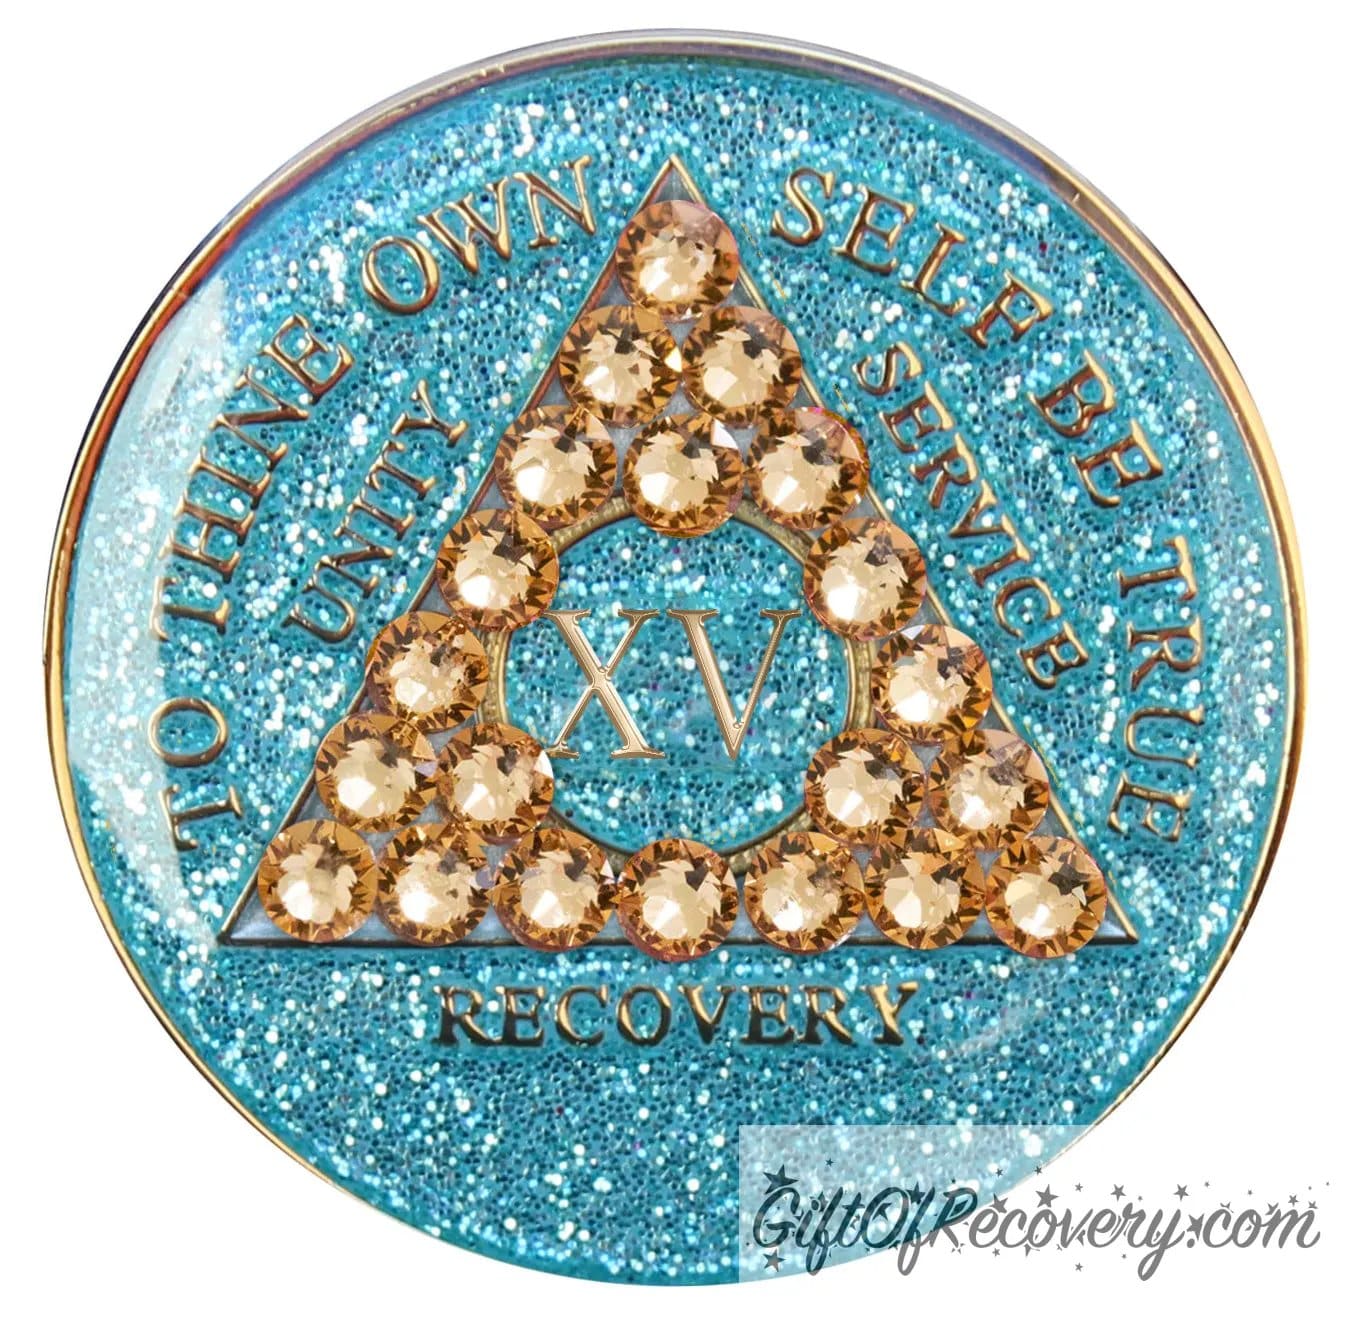 15 year Aqua glitter AA medallion with 21 gold genuine crystal making a triangle in the center, and to thine own self be true, unity, service, recovery, the roman numeral in the center and the rim of the recovery medallion embossed in 14k gold plated brass and sealed with resin for a glossy shine.